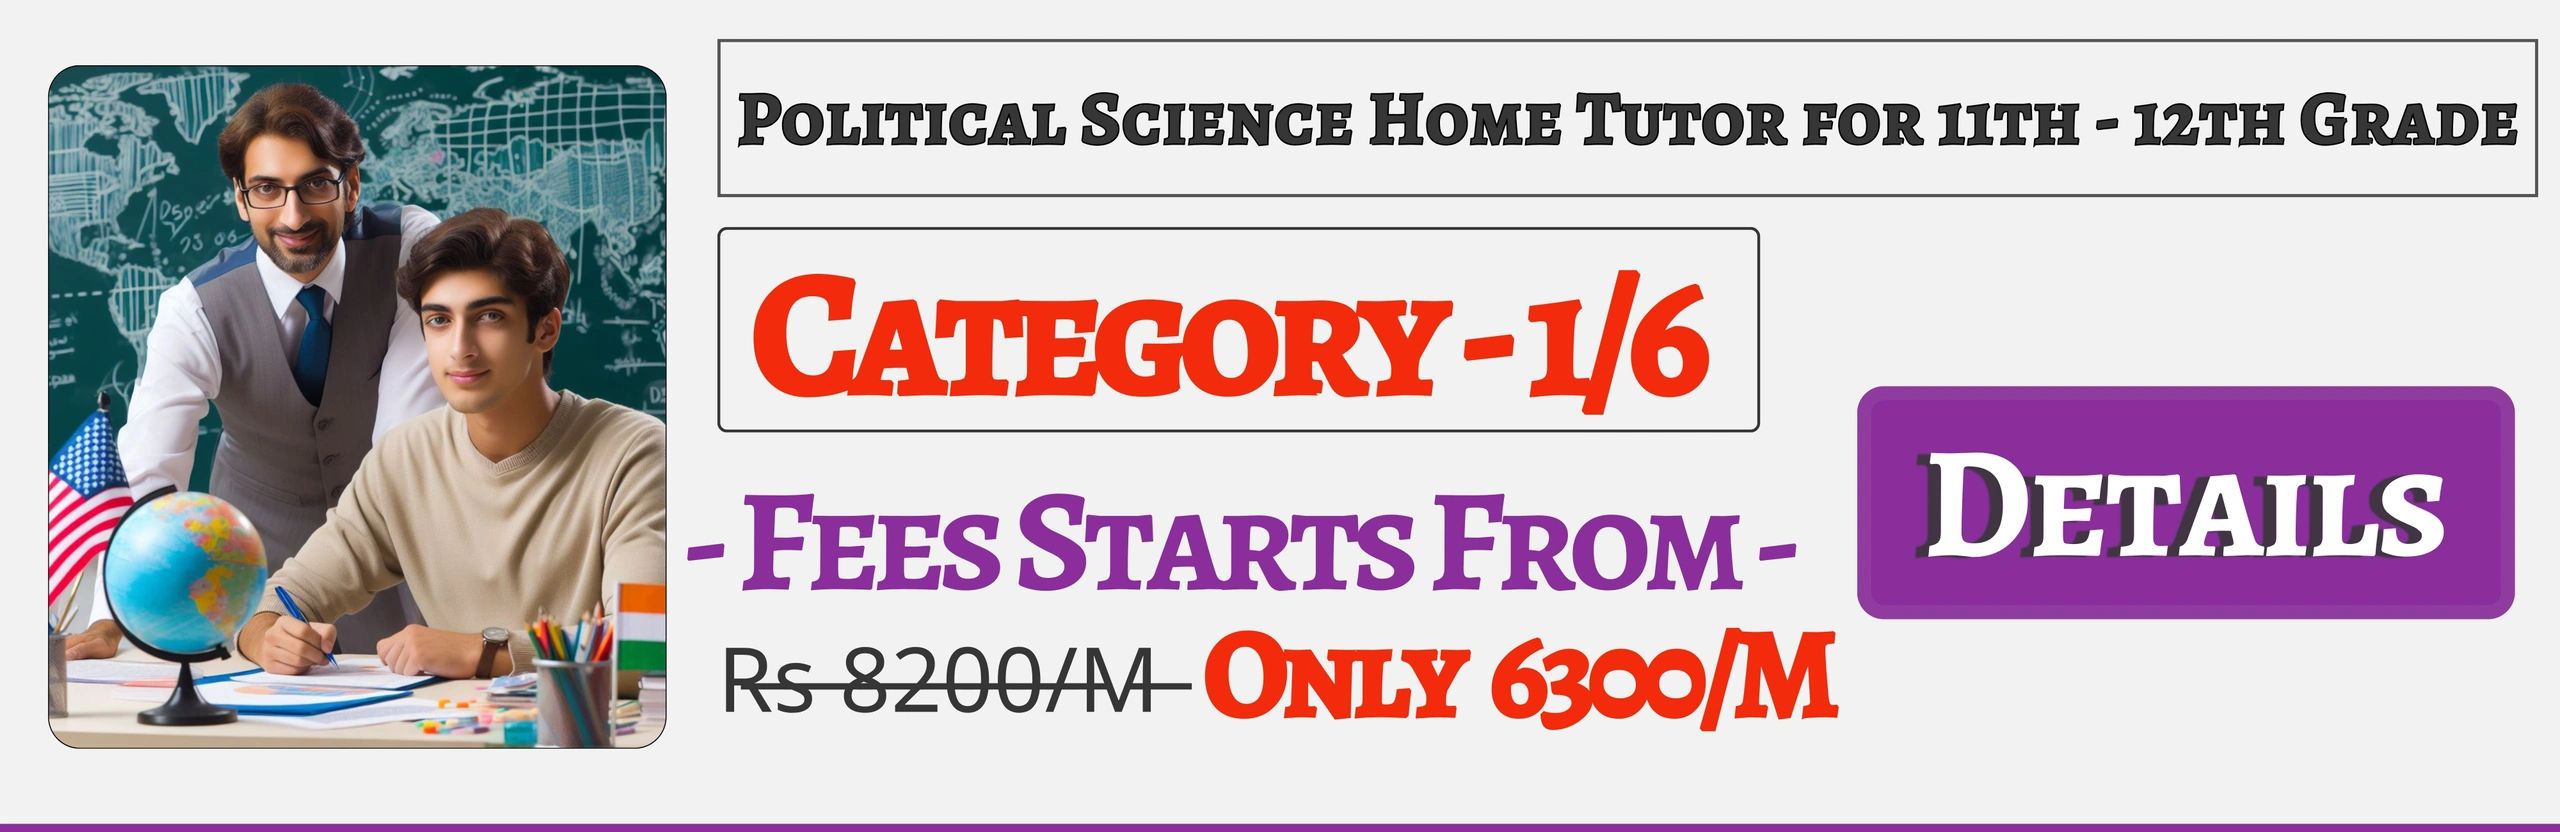 Book Best Nearby Political Science Home Tuition Tutors For 11th & 12th In Jaipur , Fees Only 6300/M